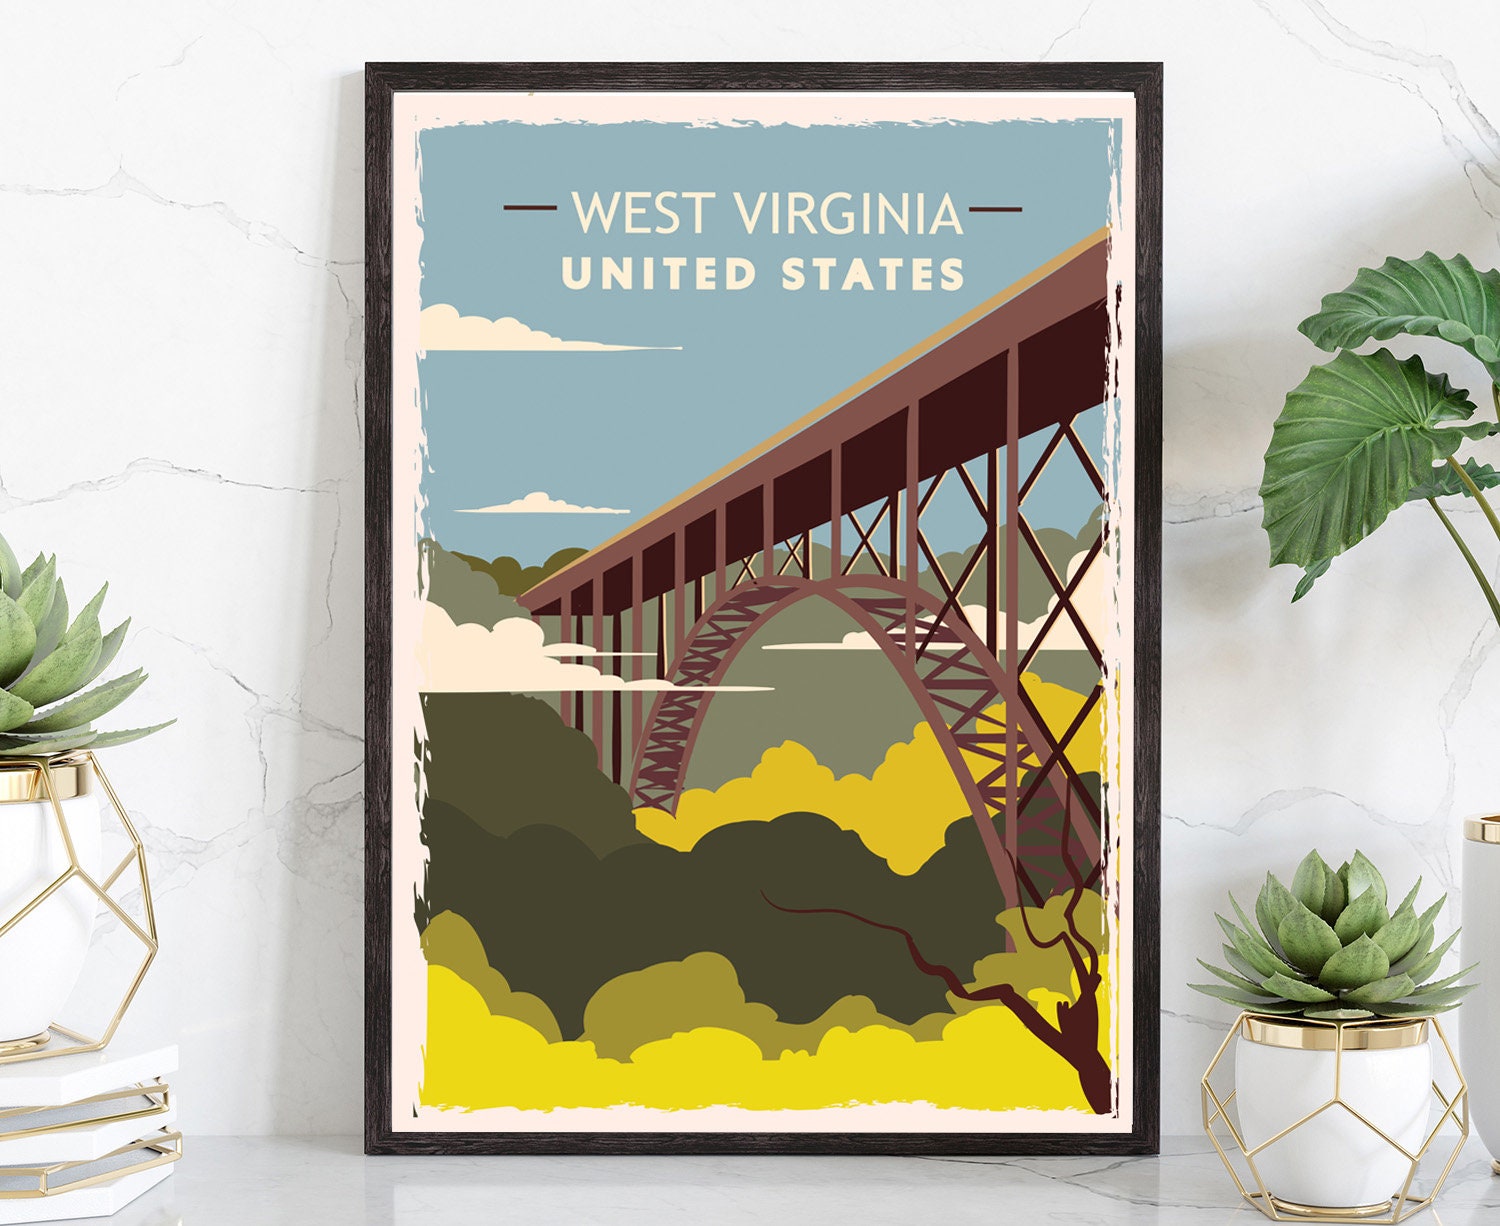 Retro Style Travel Poster, West Virginia Vintage Rustic Poster Print, Home Wall Art, Office Wall Decor, West Virginia State Map Poster